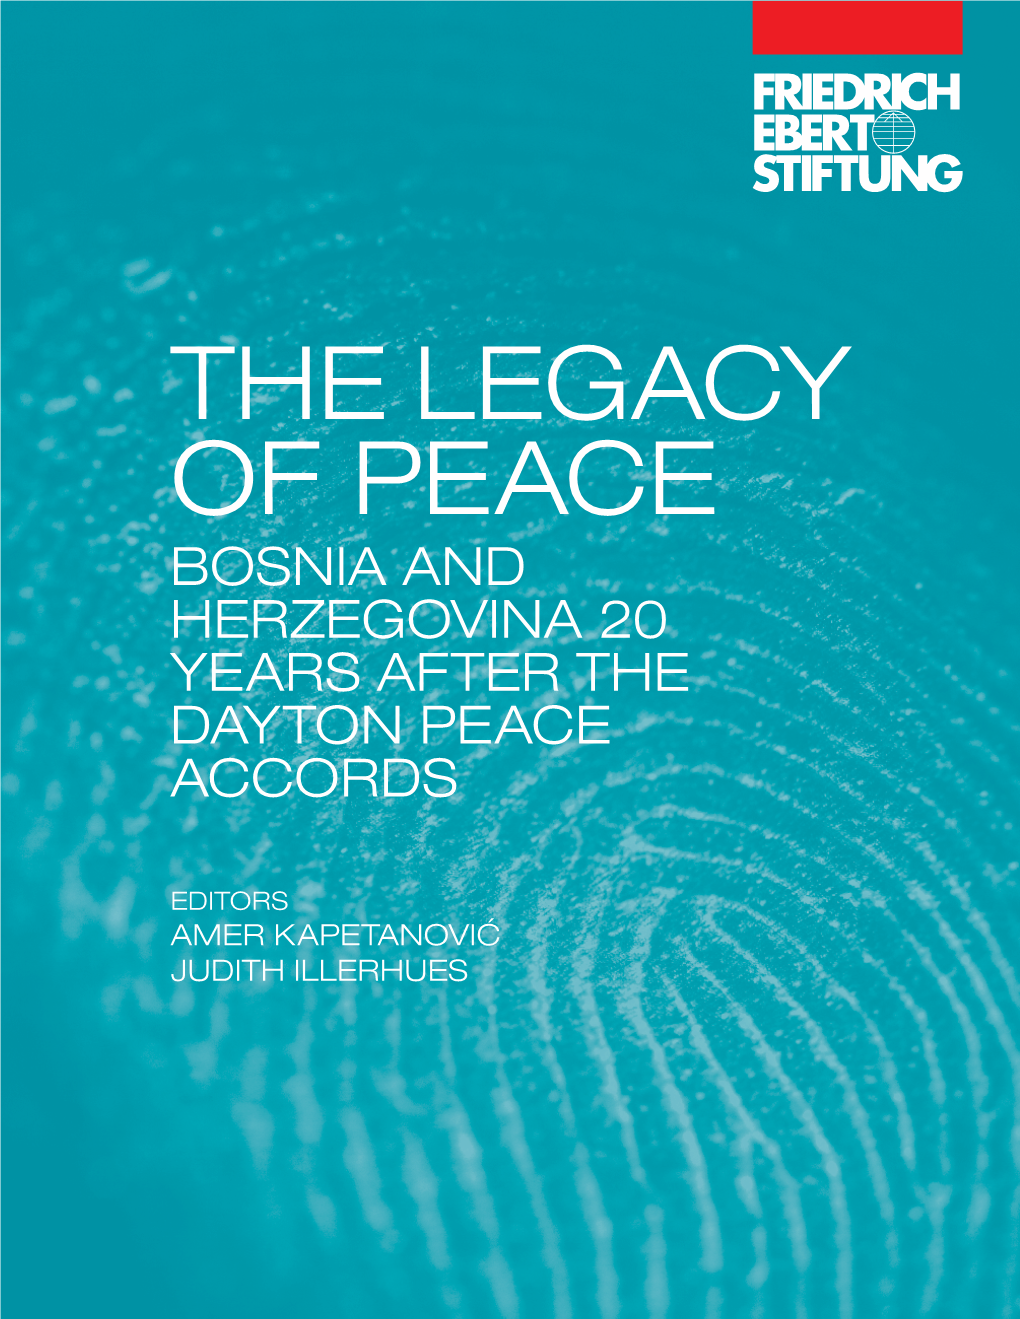 The Legacy of Peace Bosnia and Herzegovina 20 Years After the Dayton Peace Accords